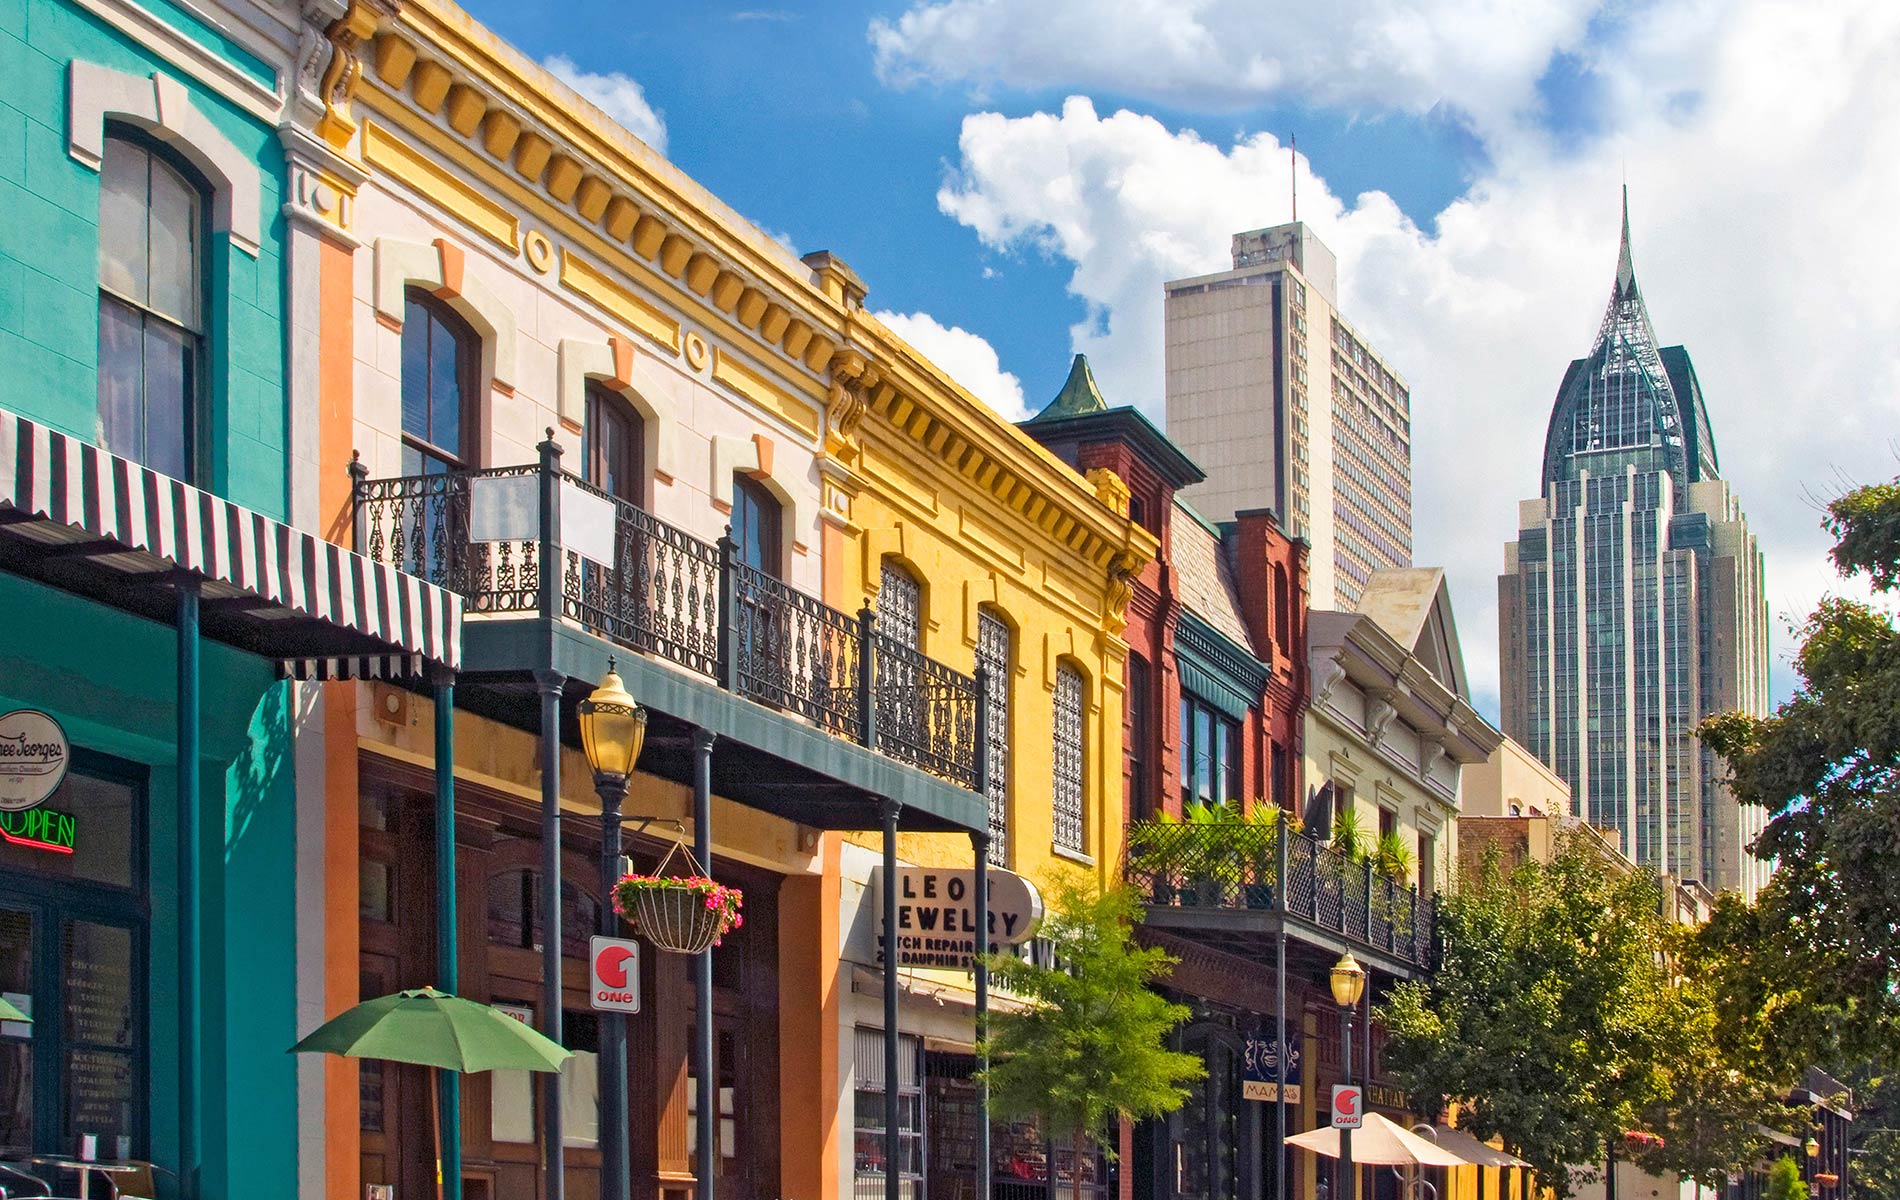 Charming and colorful historic facades of old downtown are juxtaposed against the striking modern Mobile, Alabama skyline. 